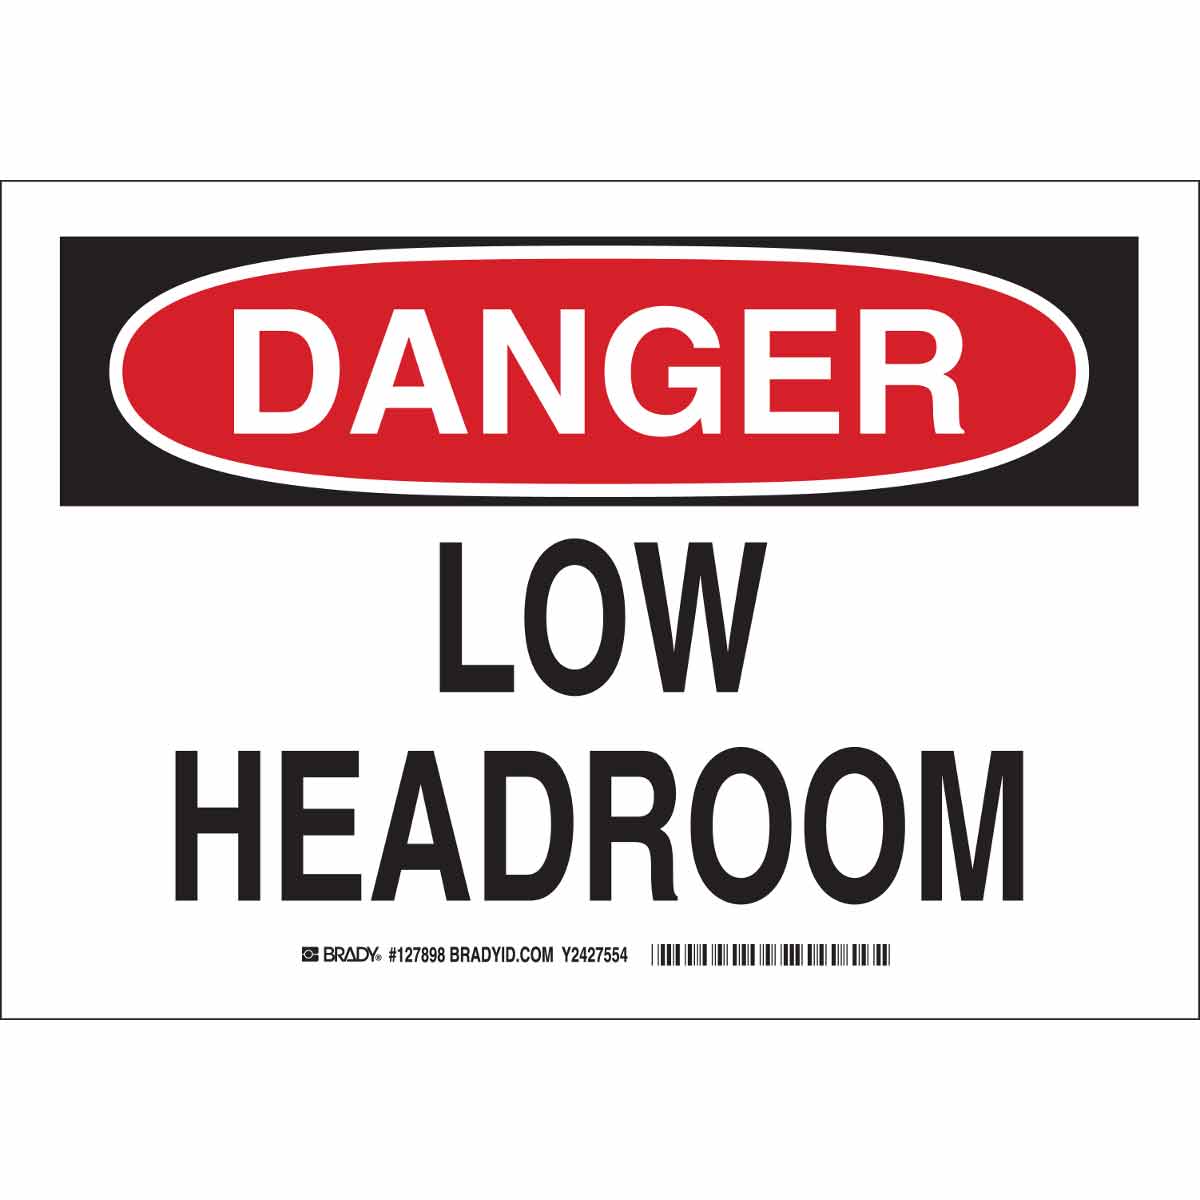 Height Headroom Danger Safety Size Options Caution Low Clearance Sign 